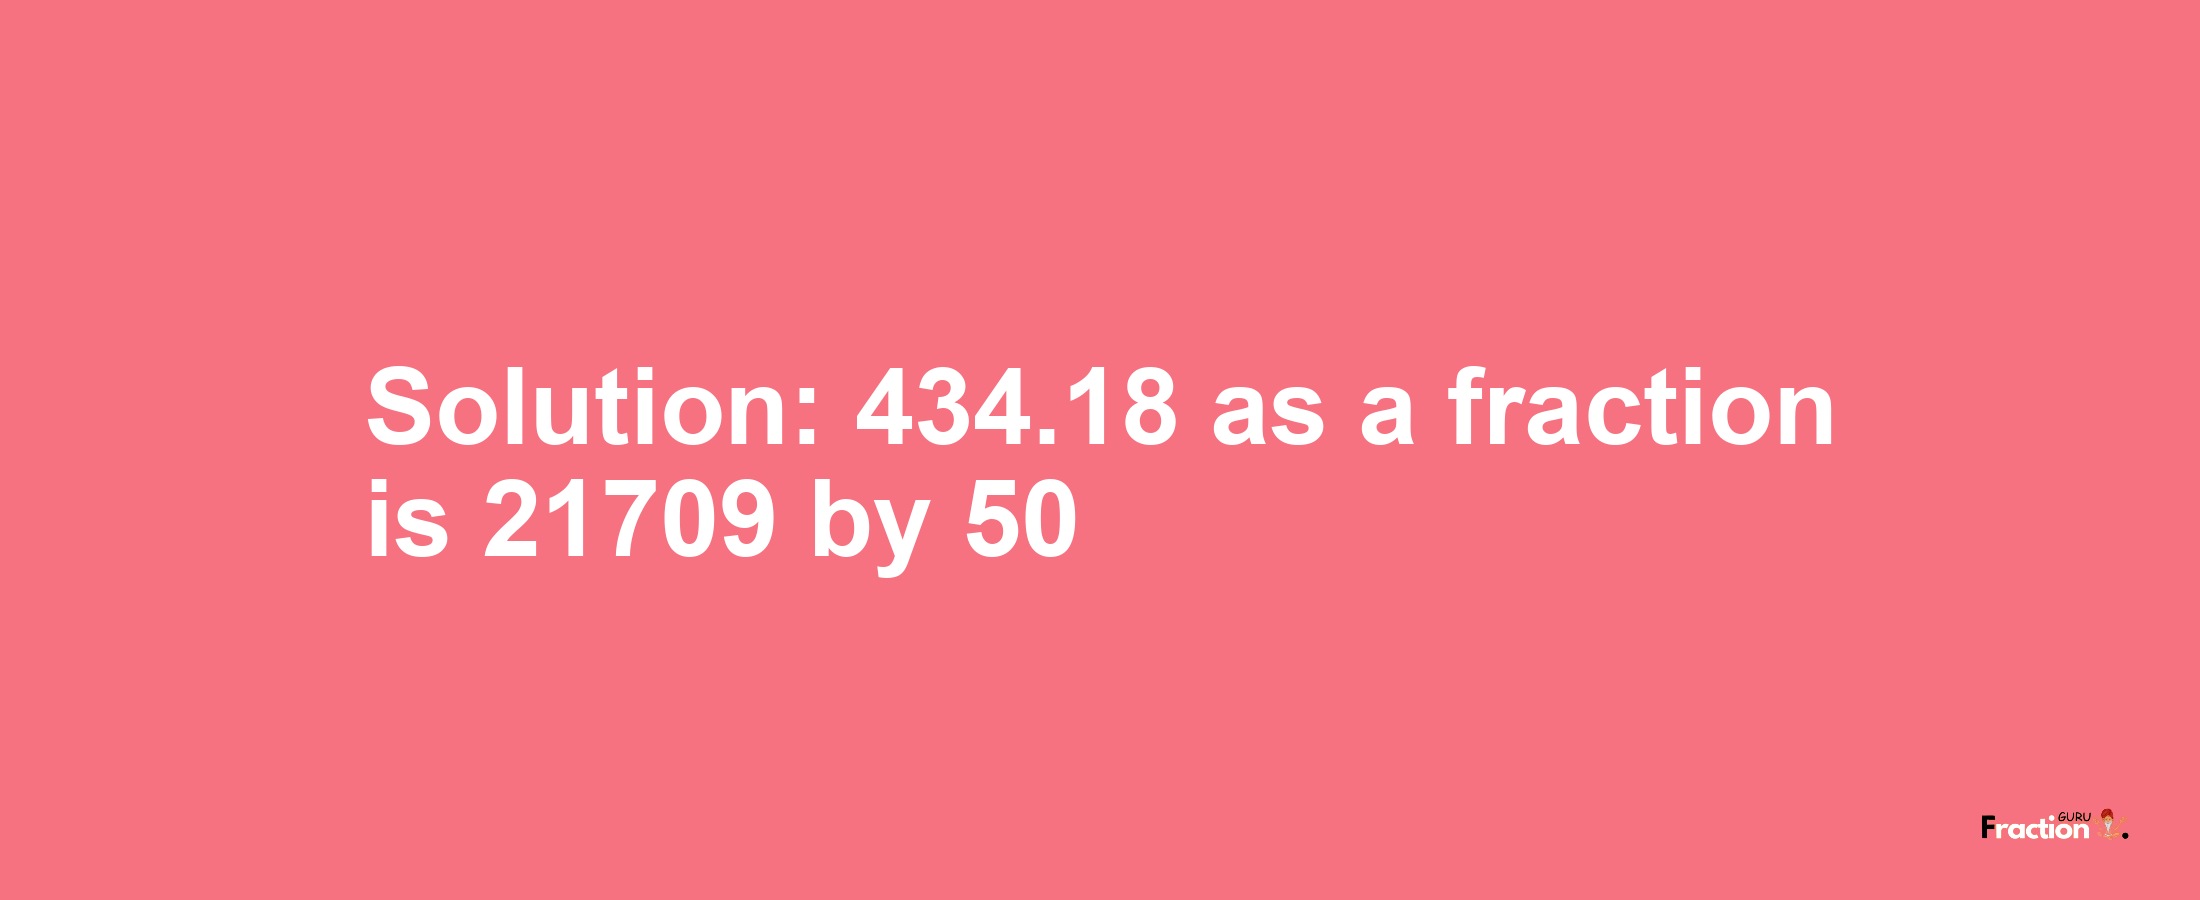 Solution:434.18 as a fraction is 21709/50